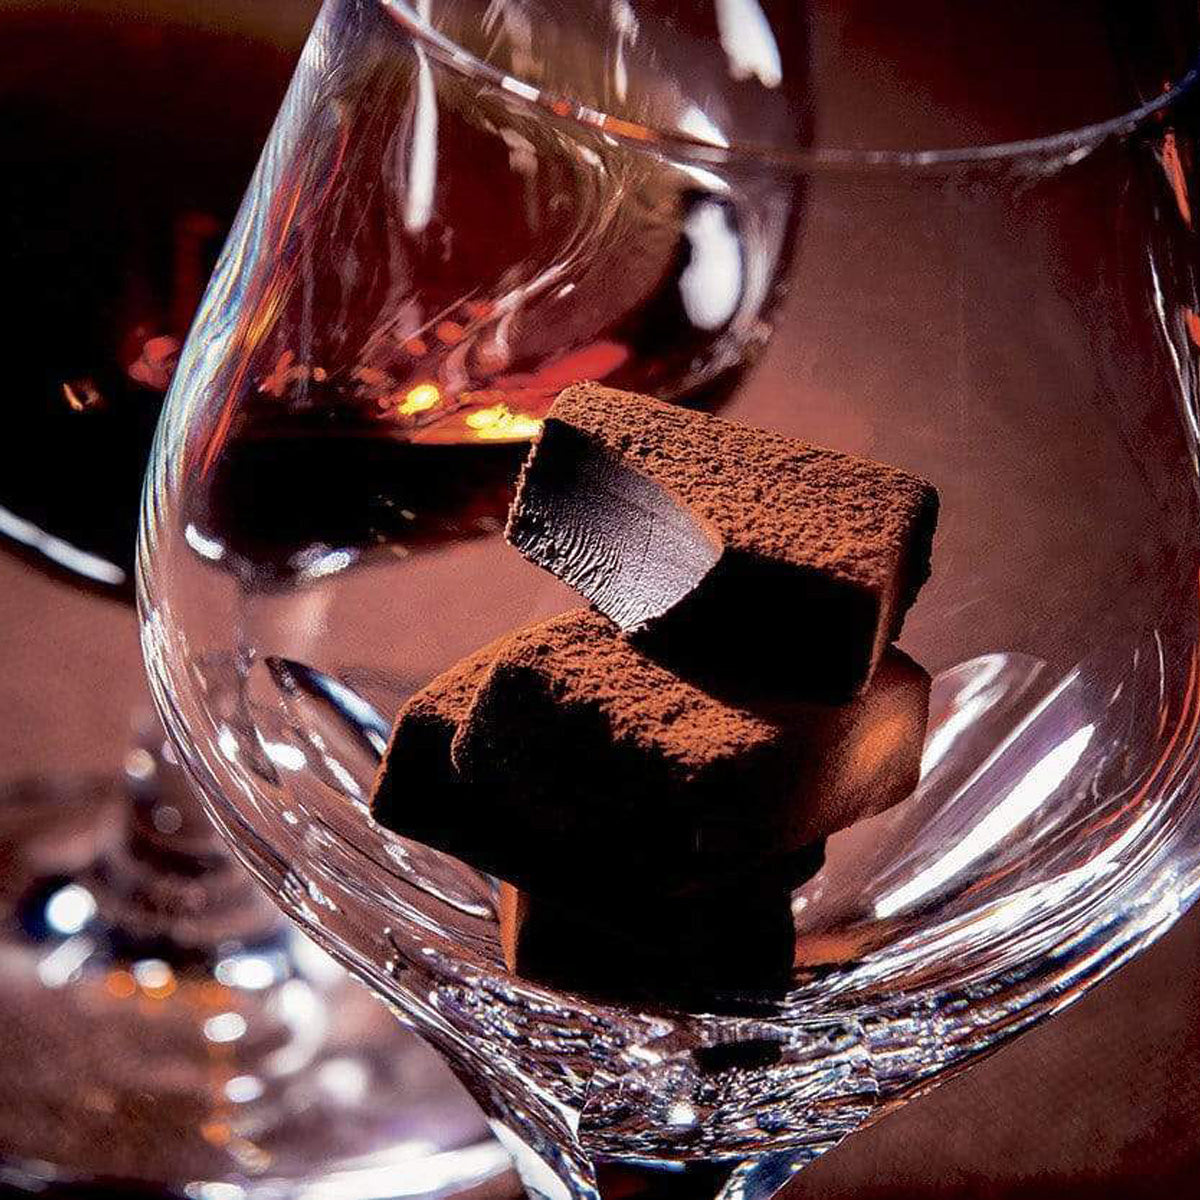 ROYCE' Chocolate - Nama Chocolate "Bitter" - Image shows brown blocks of chocolates inside a clear glass. Background is in dark brown and seen behind is another glass filled with amber-hued cognac.